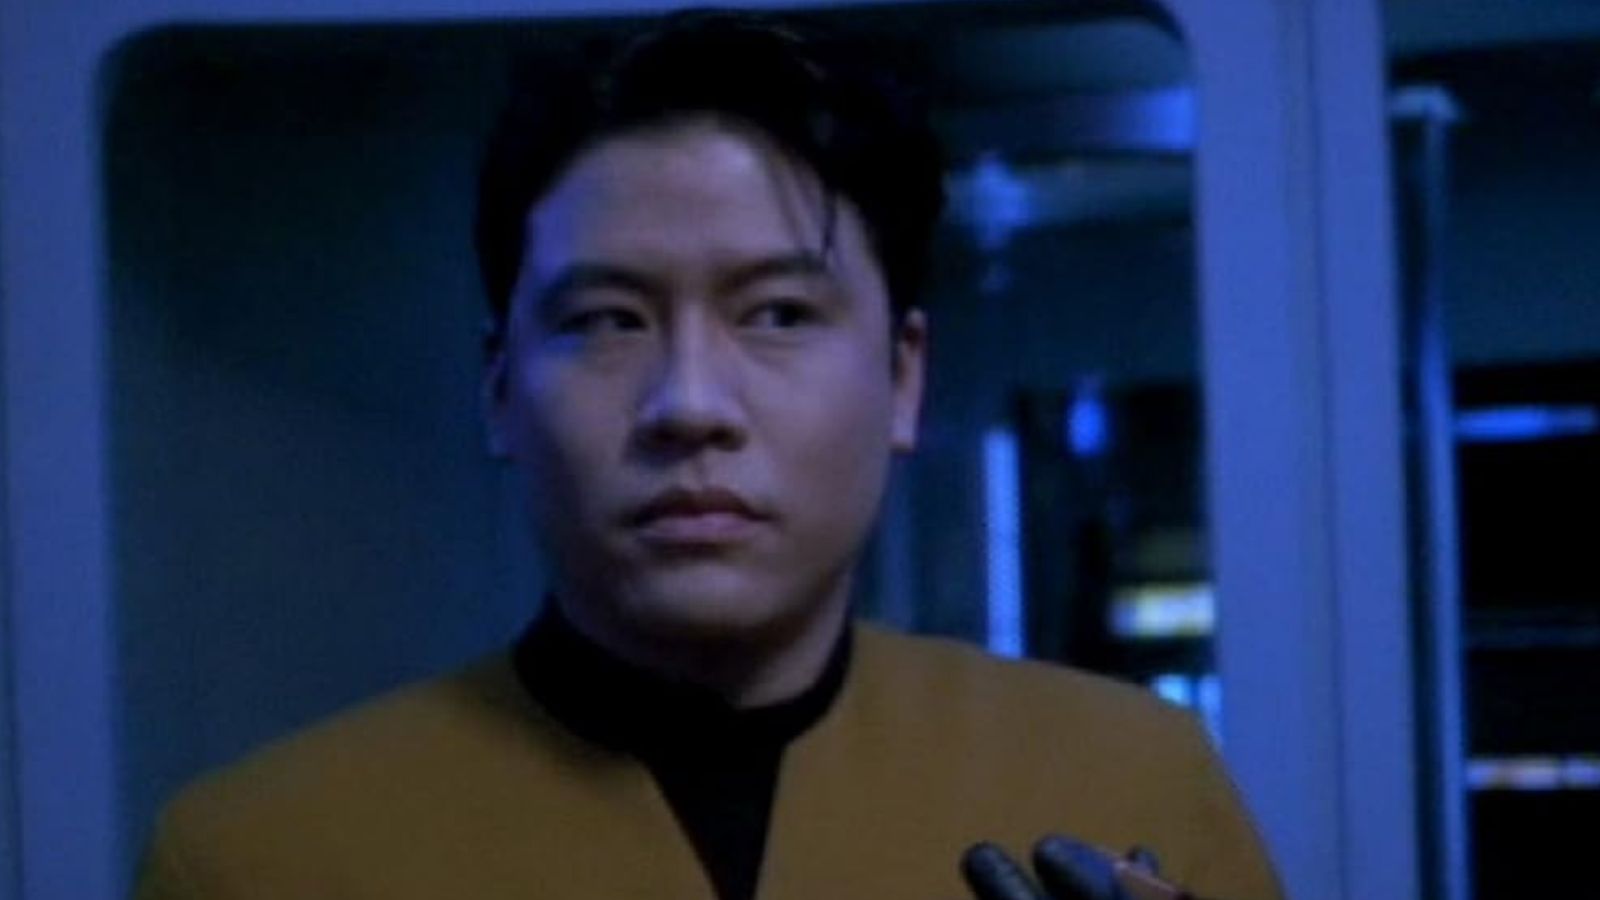 <span>He was one of the blandest Star Trek characters, and even he </span><span>couldn’t</span><span> outwit his perfect shade of vanilla. His </span><a class="editor-rtfLink" href="https://screenrant.com/star-trek-voyager-harry-kim-failed-romances-ranked/" rel="noopener"><span>romantic escapades</span></a><span> left us endlessly frustrated, and we </span><span>couldn’t</span><span> help but pity his lack of backbone. He </span><span>wasn’t</span><span> memorable.</span>